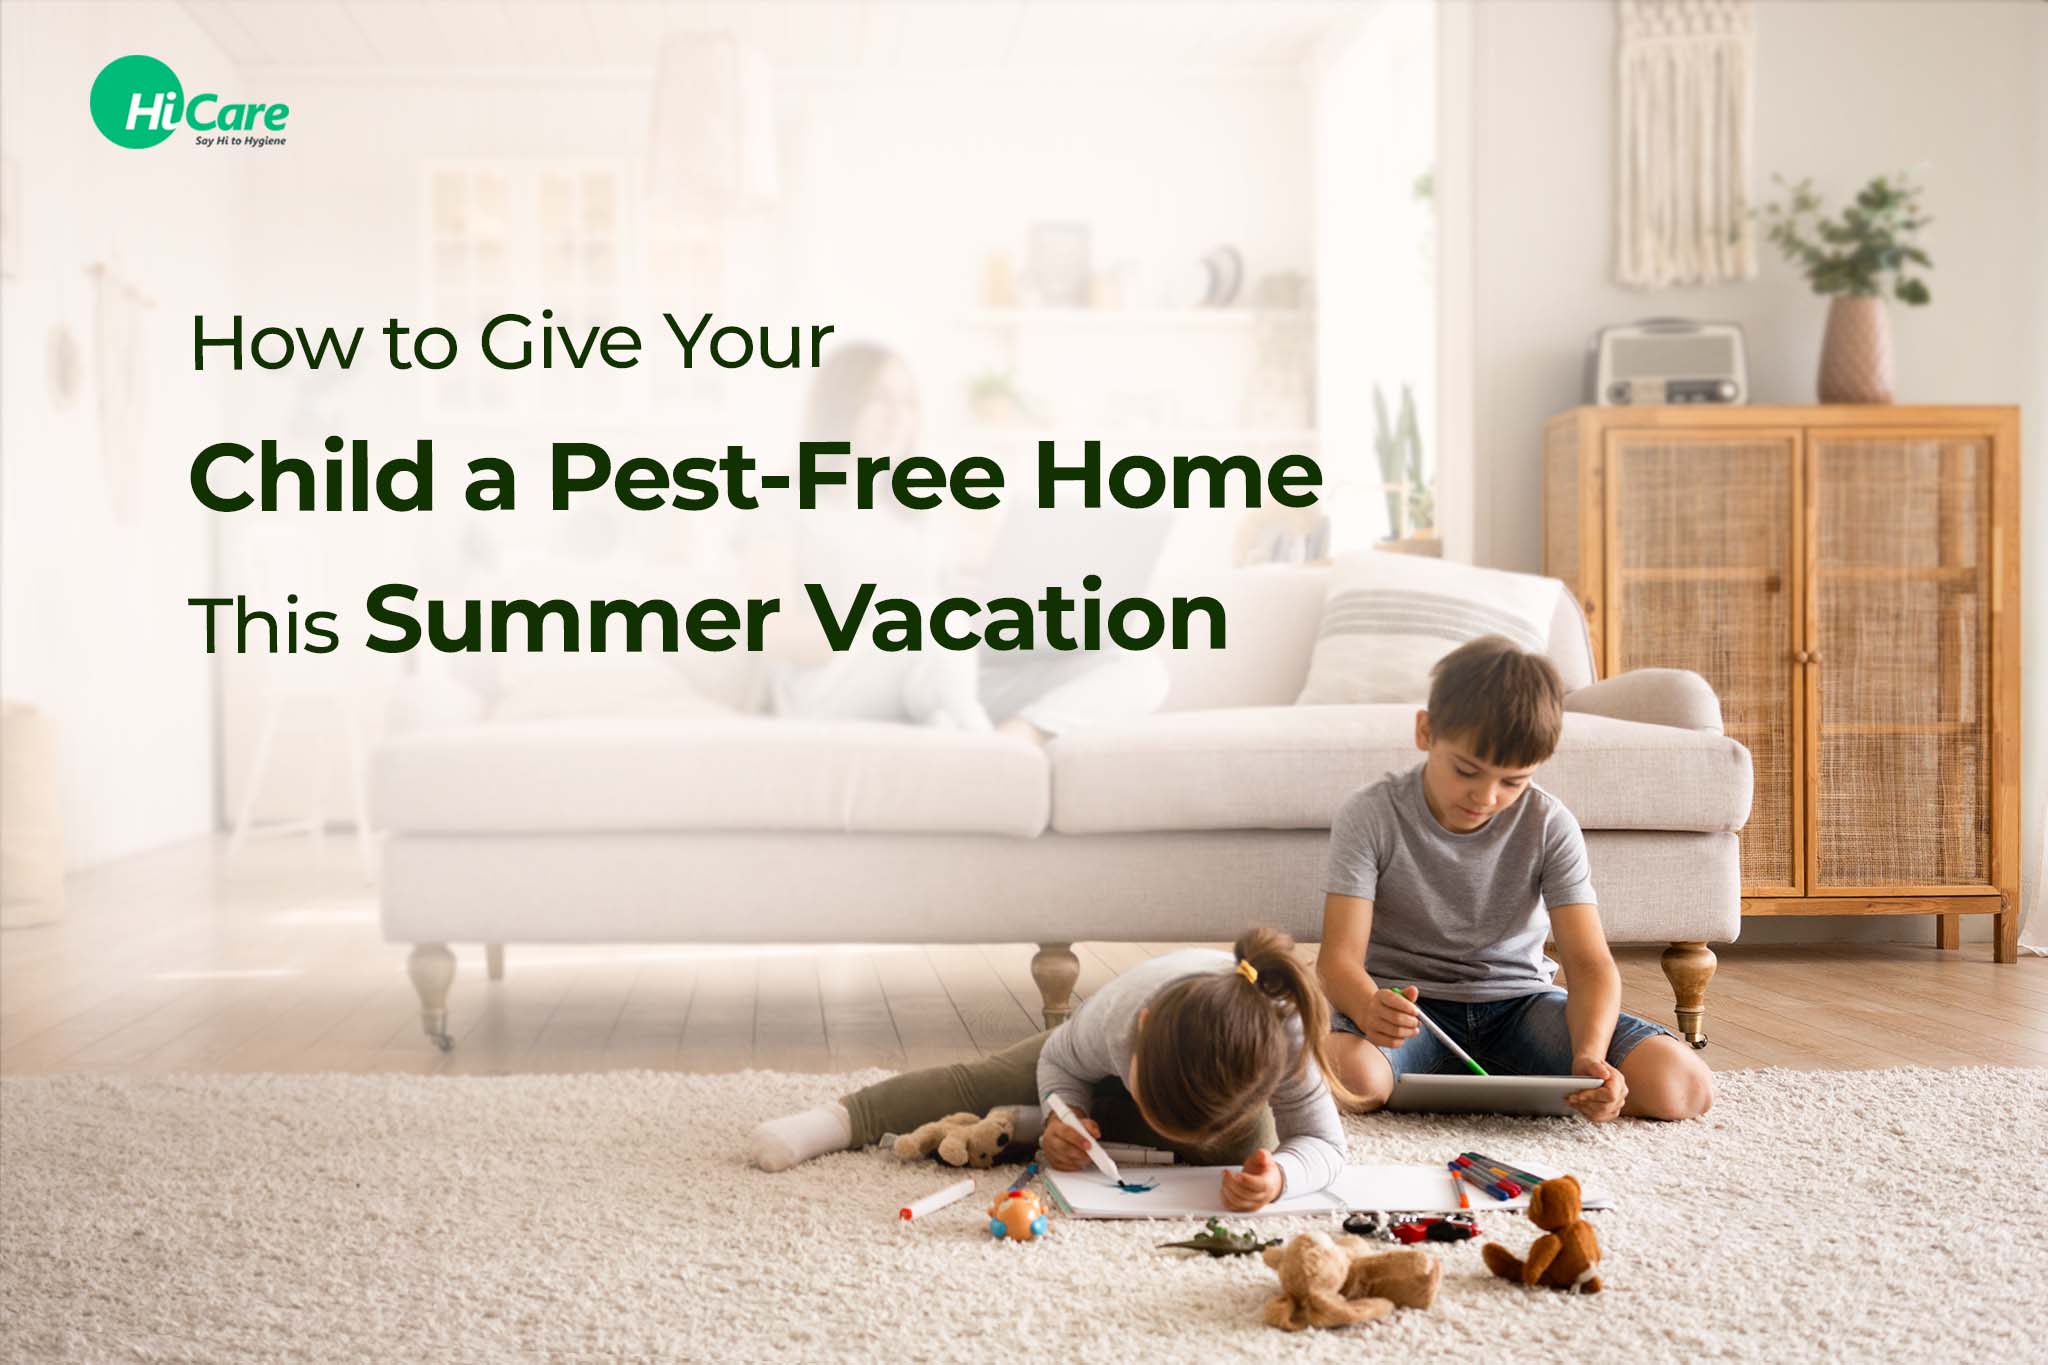 How to Give Your Child a Pest-Free Home This Summer Vacation